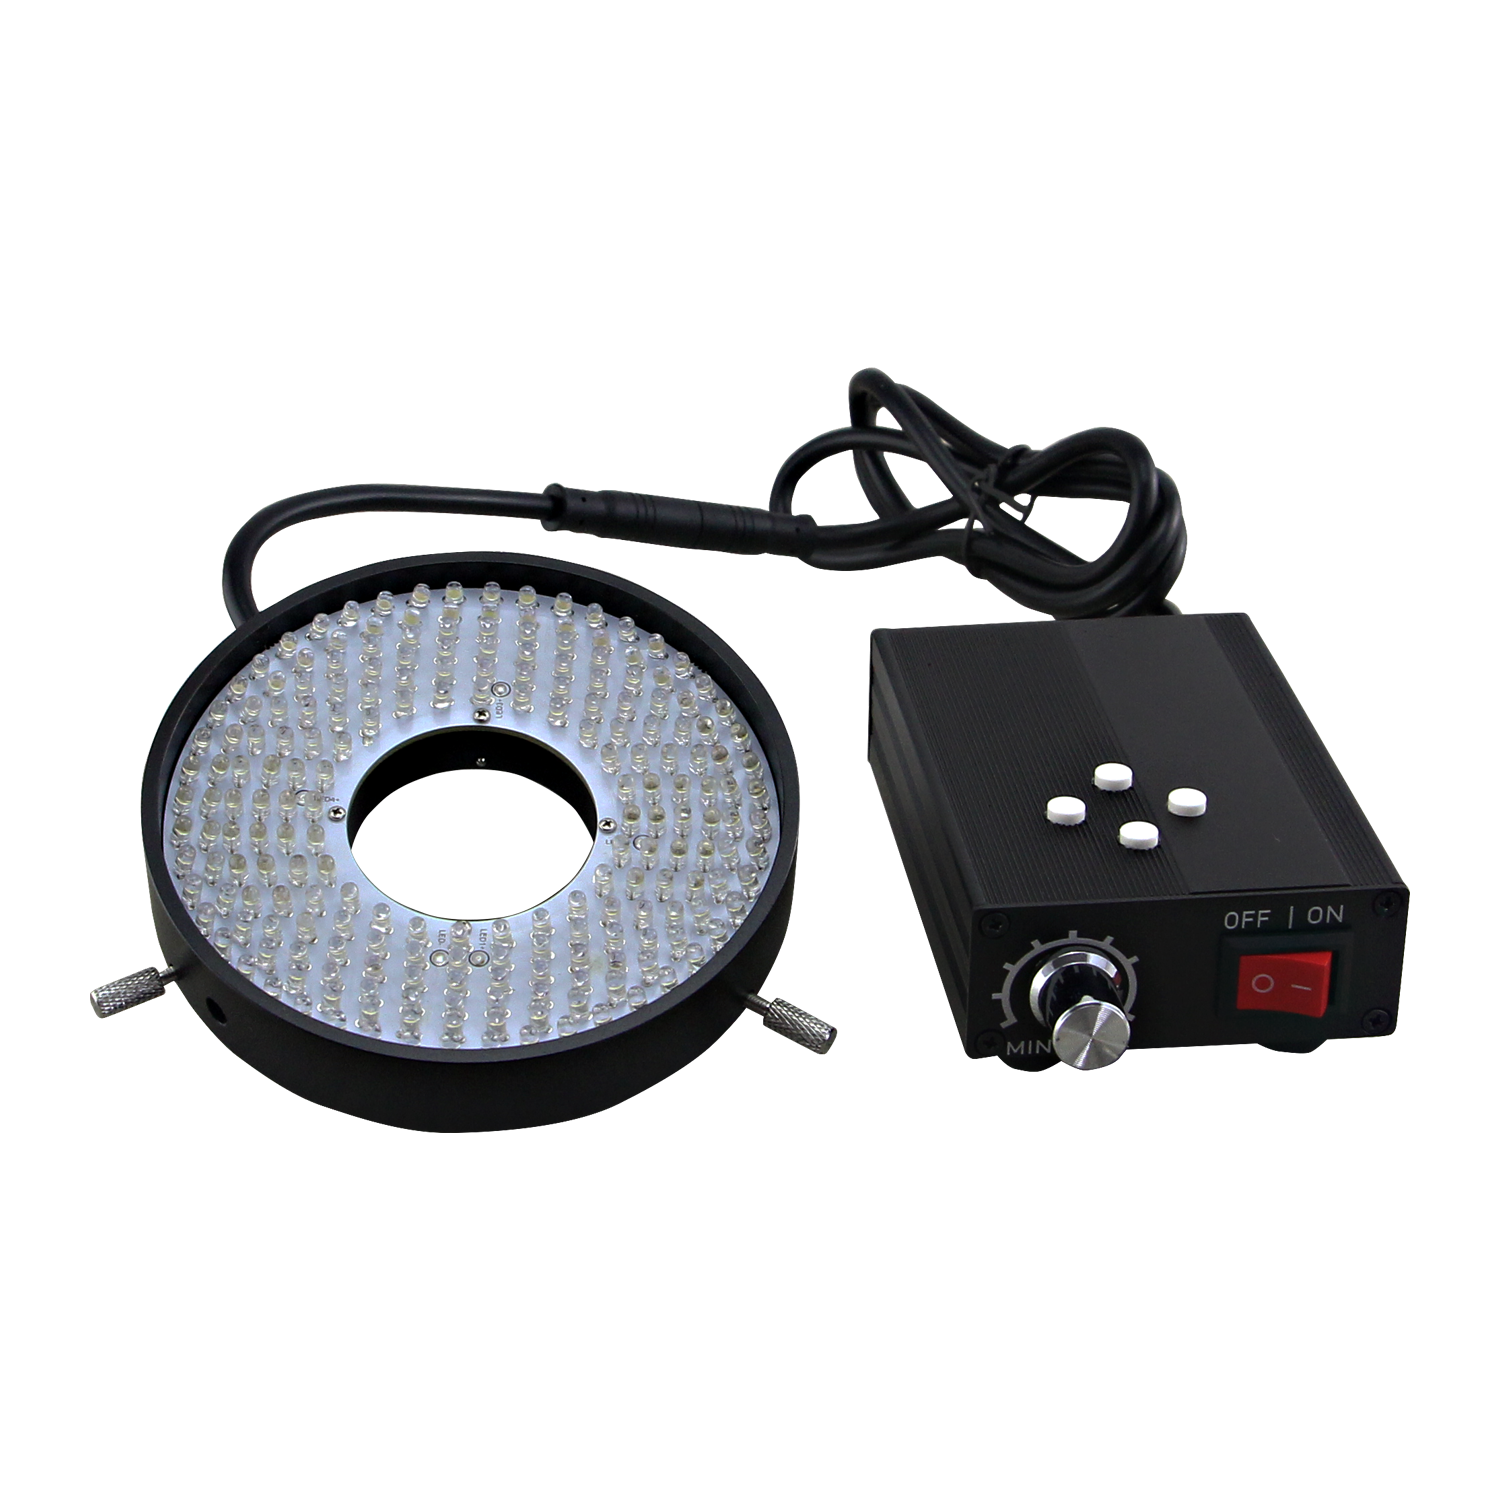 FI1440 LED ring light with 4 zones control